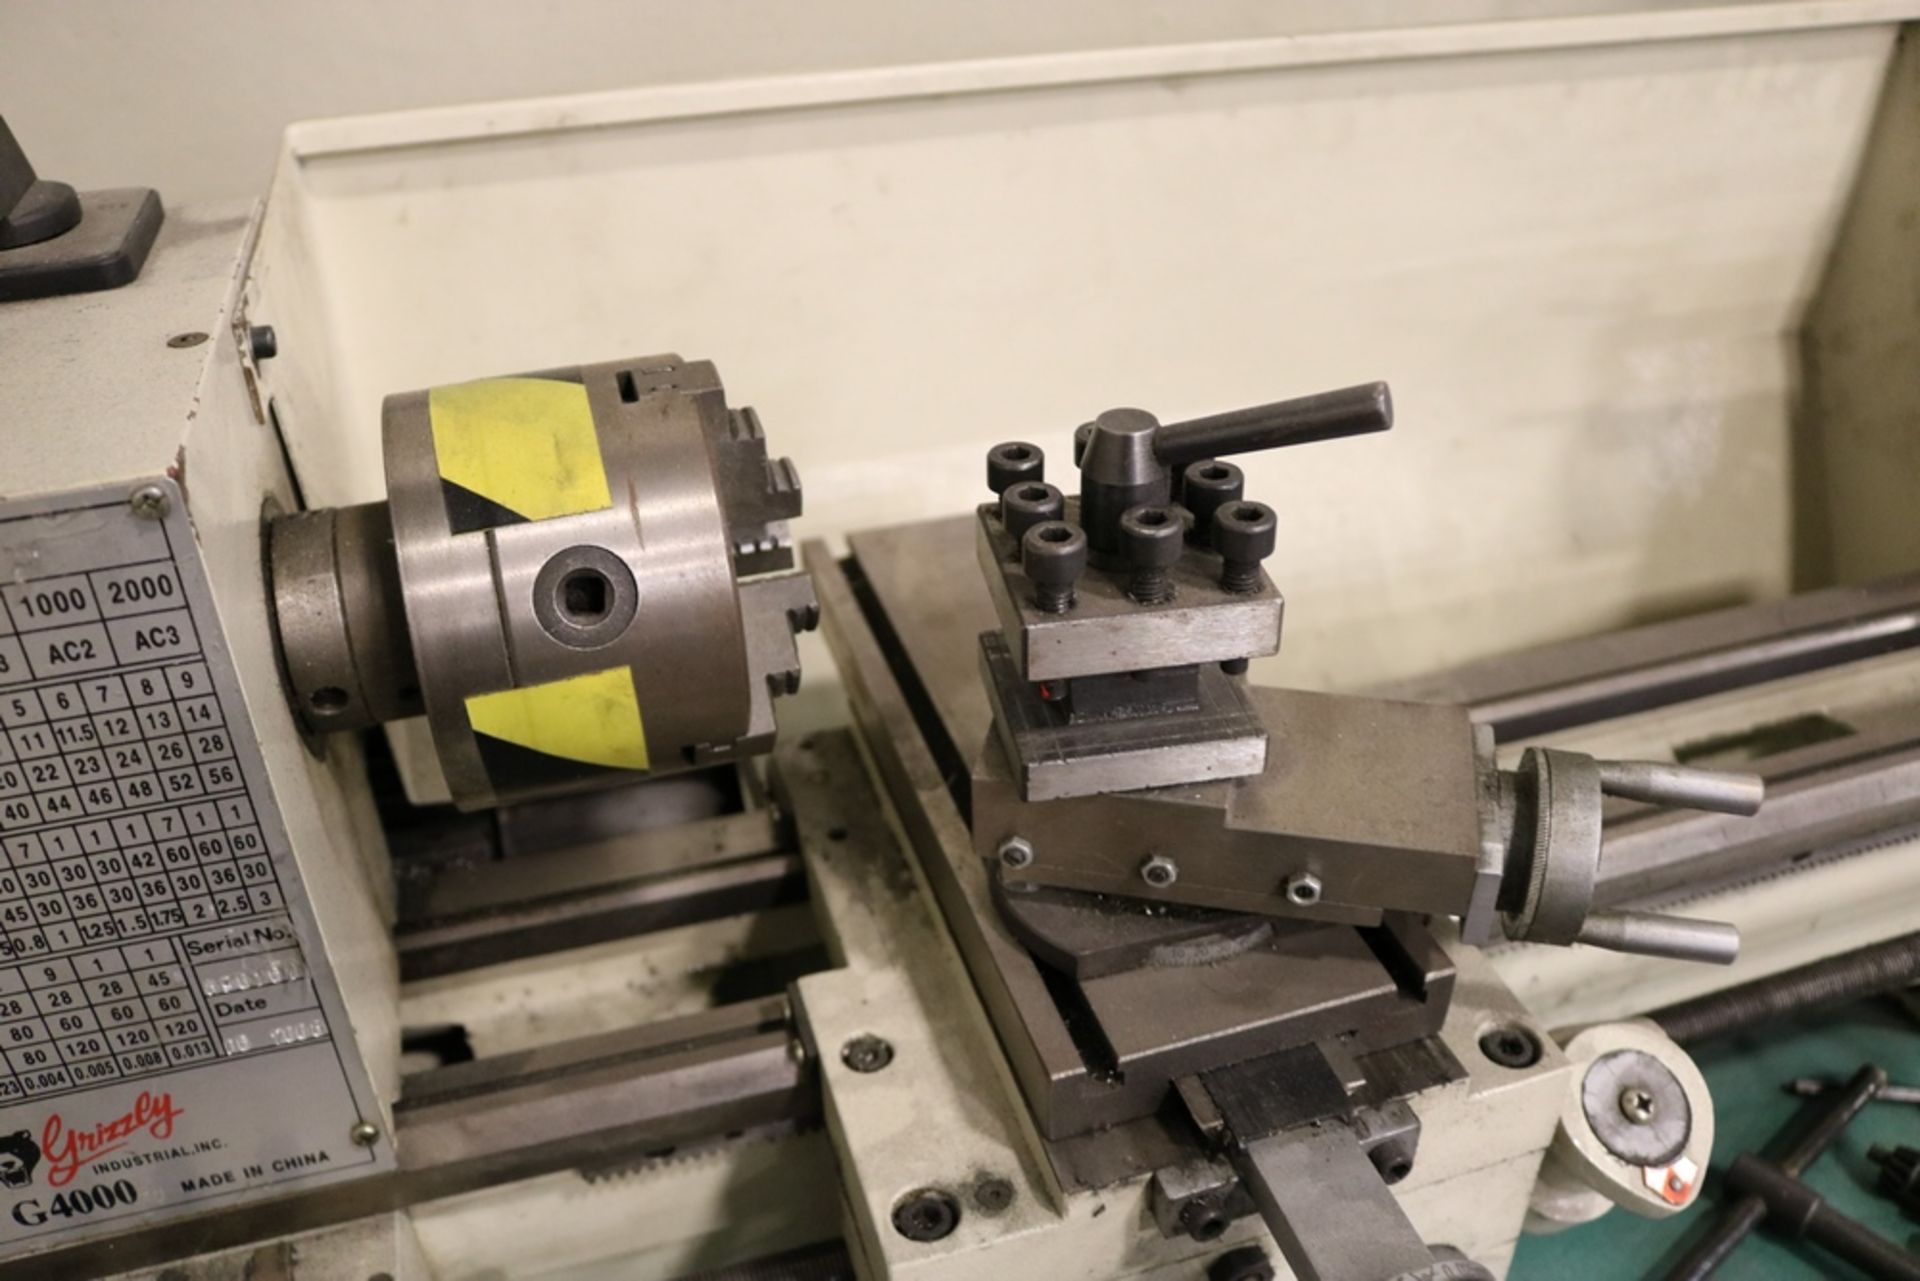 Grizzly Industrial G4000 9" x 19" Bench Lathe on Stand, 3 Jaw & 4Jaw Chuck & Others - Image 5 of 7